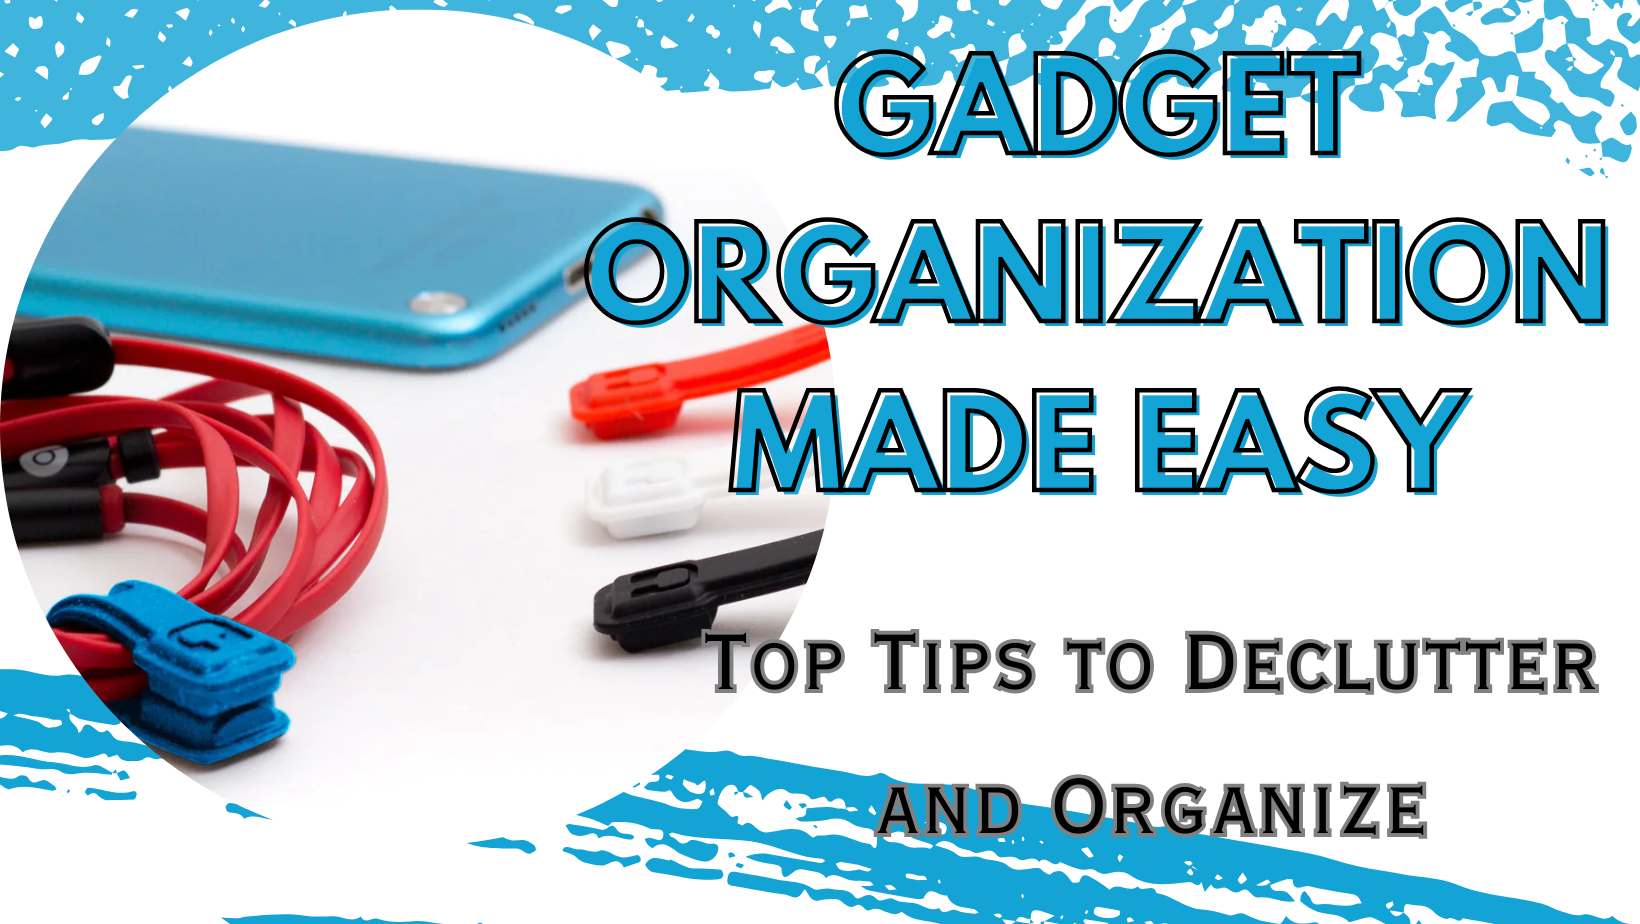 Gadget Organization Made Easy: Top Tips to Declutter and Organize